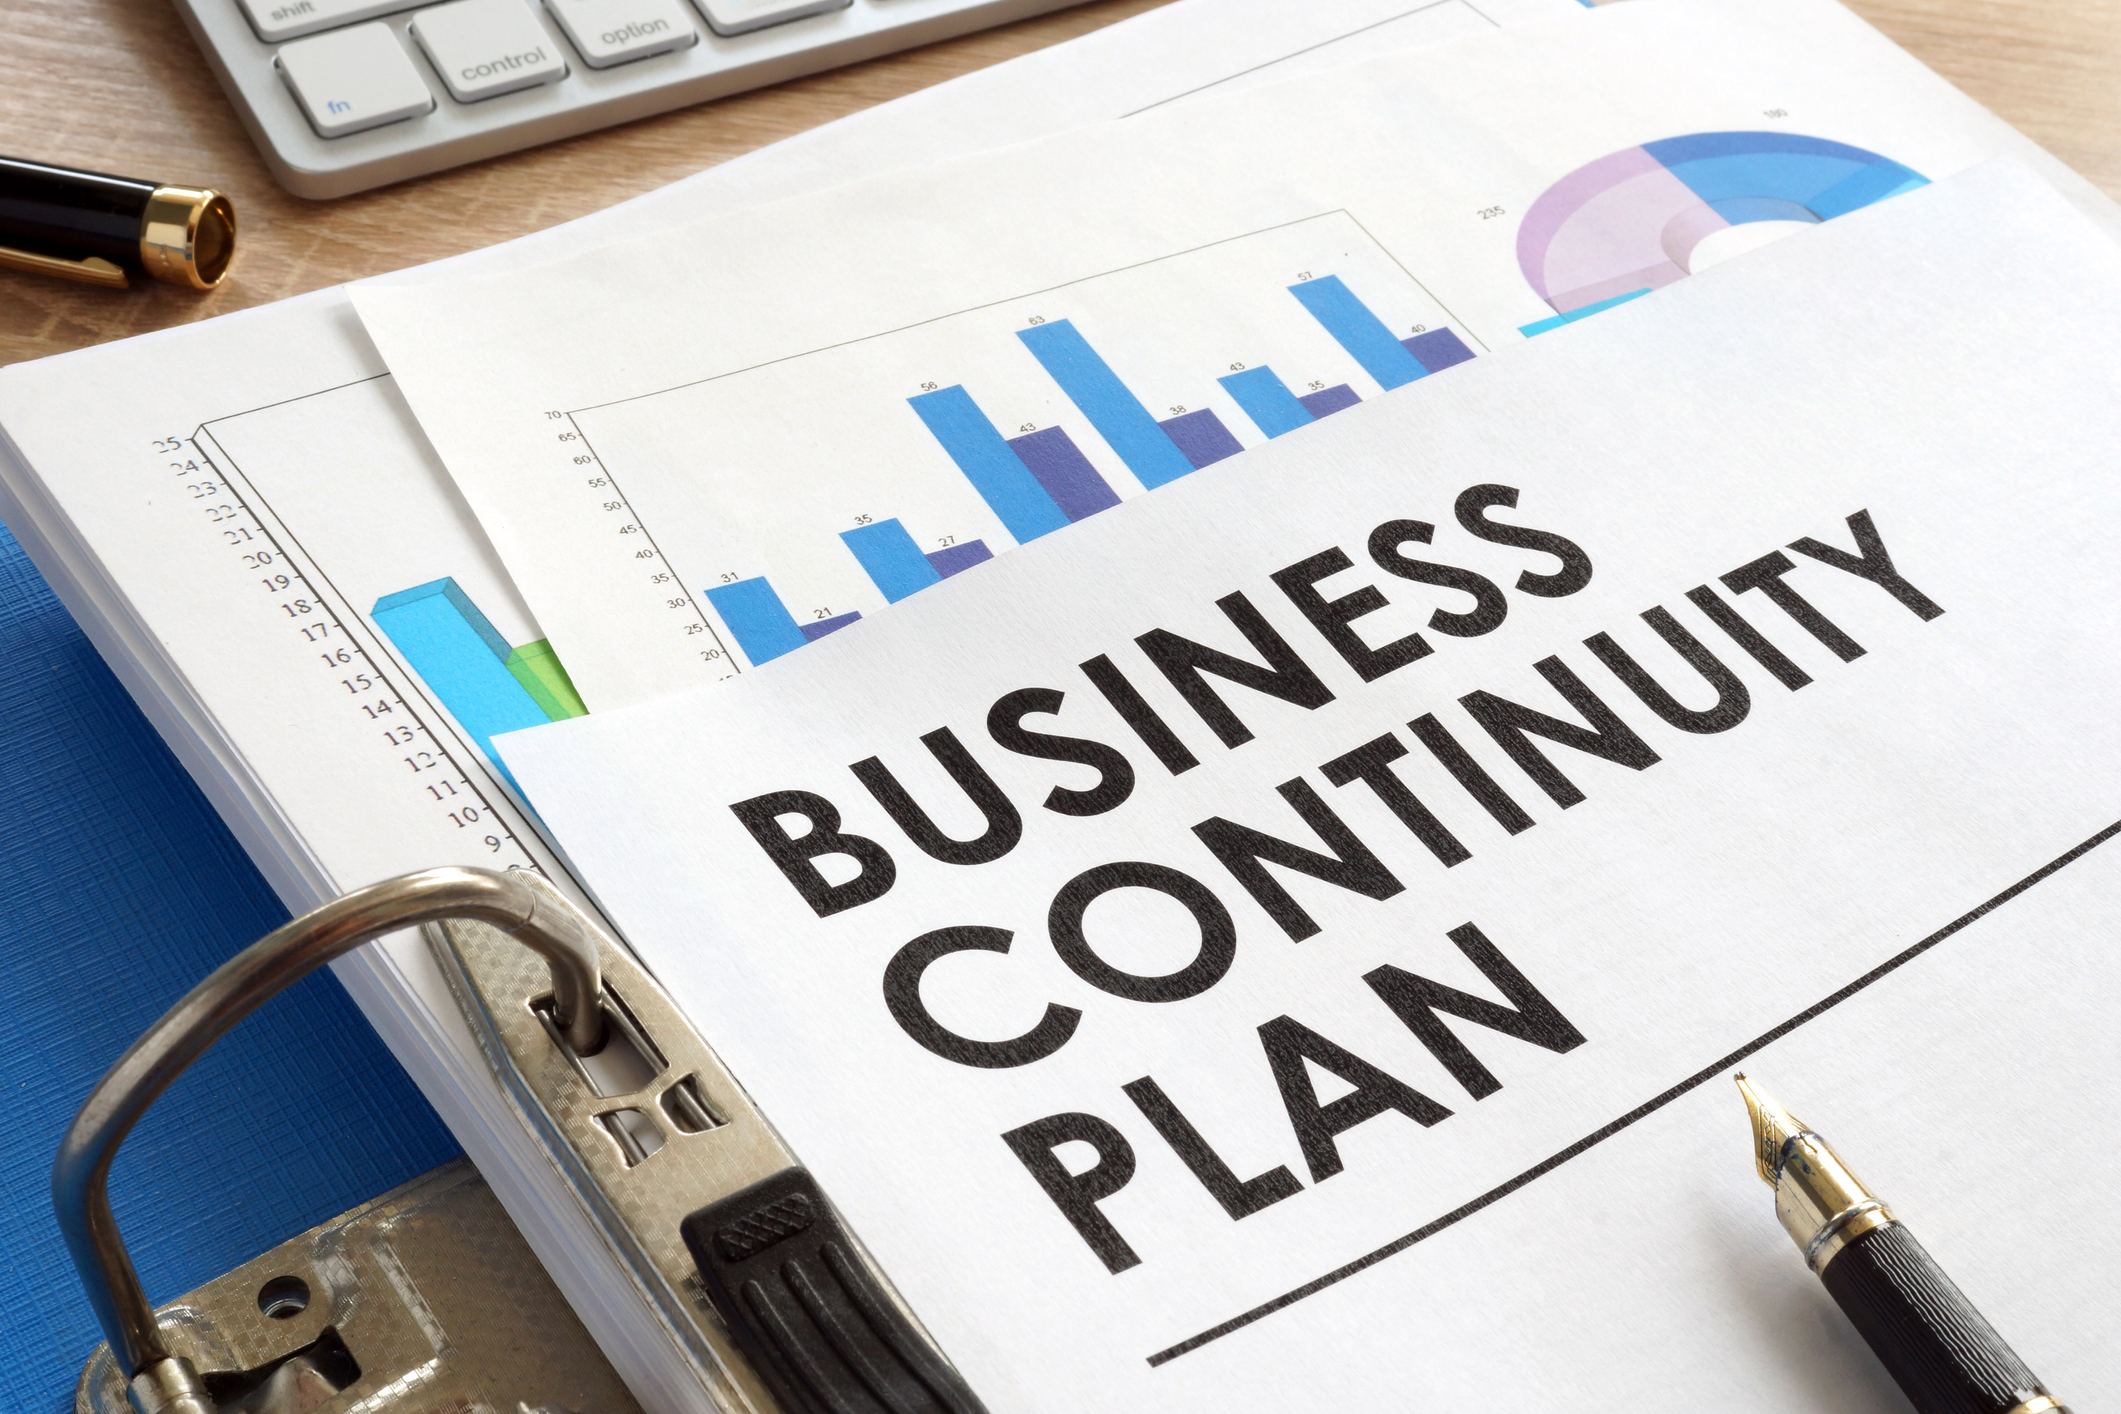 business continuity plan courses